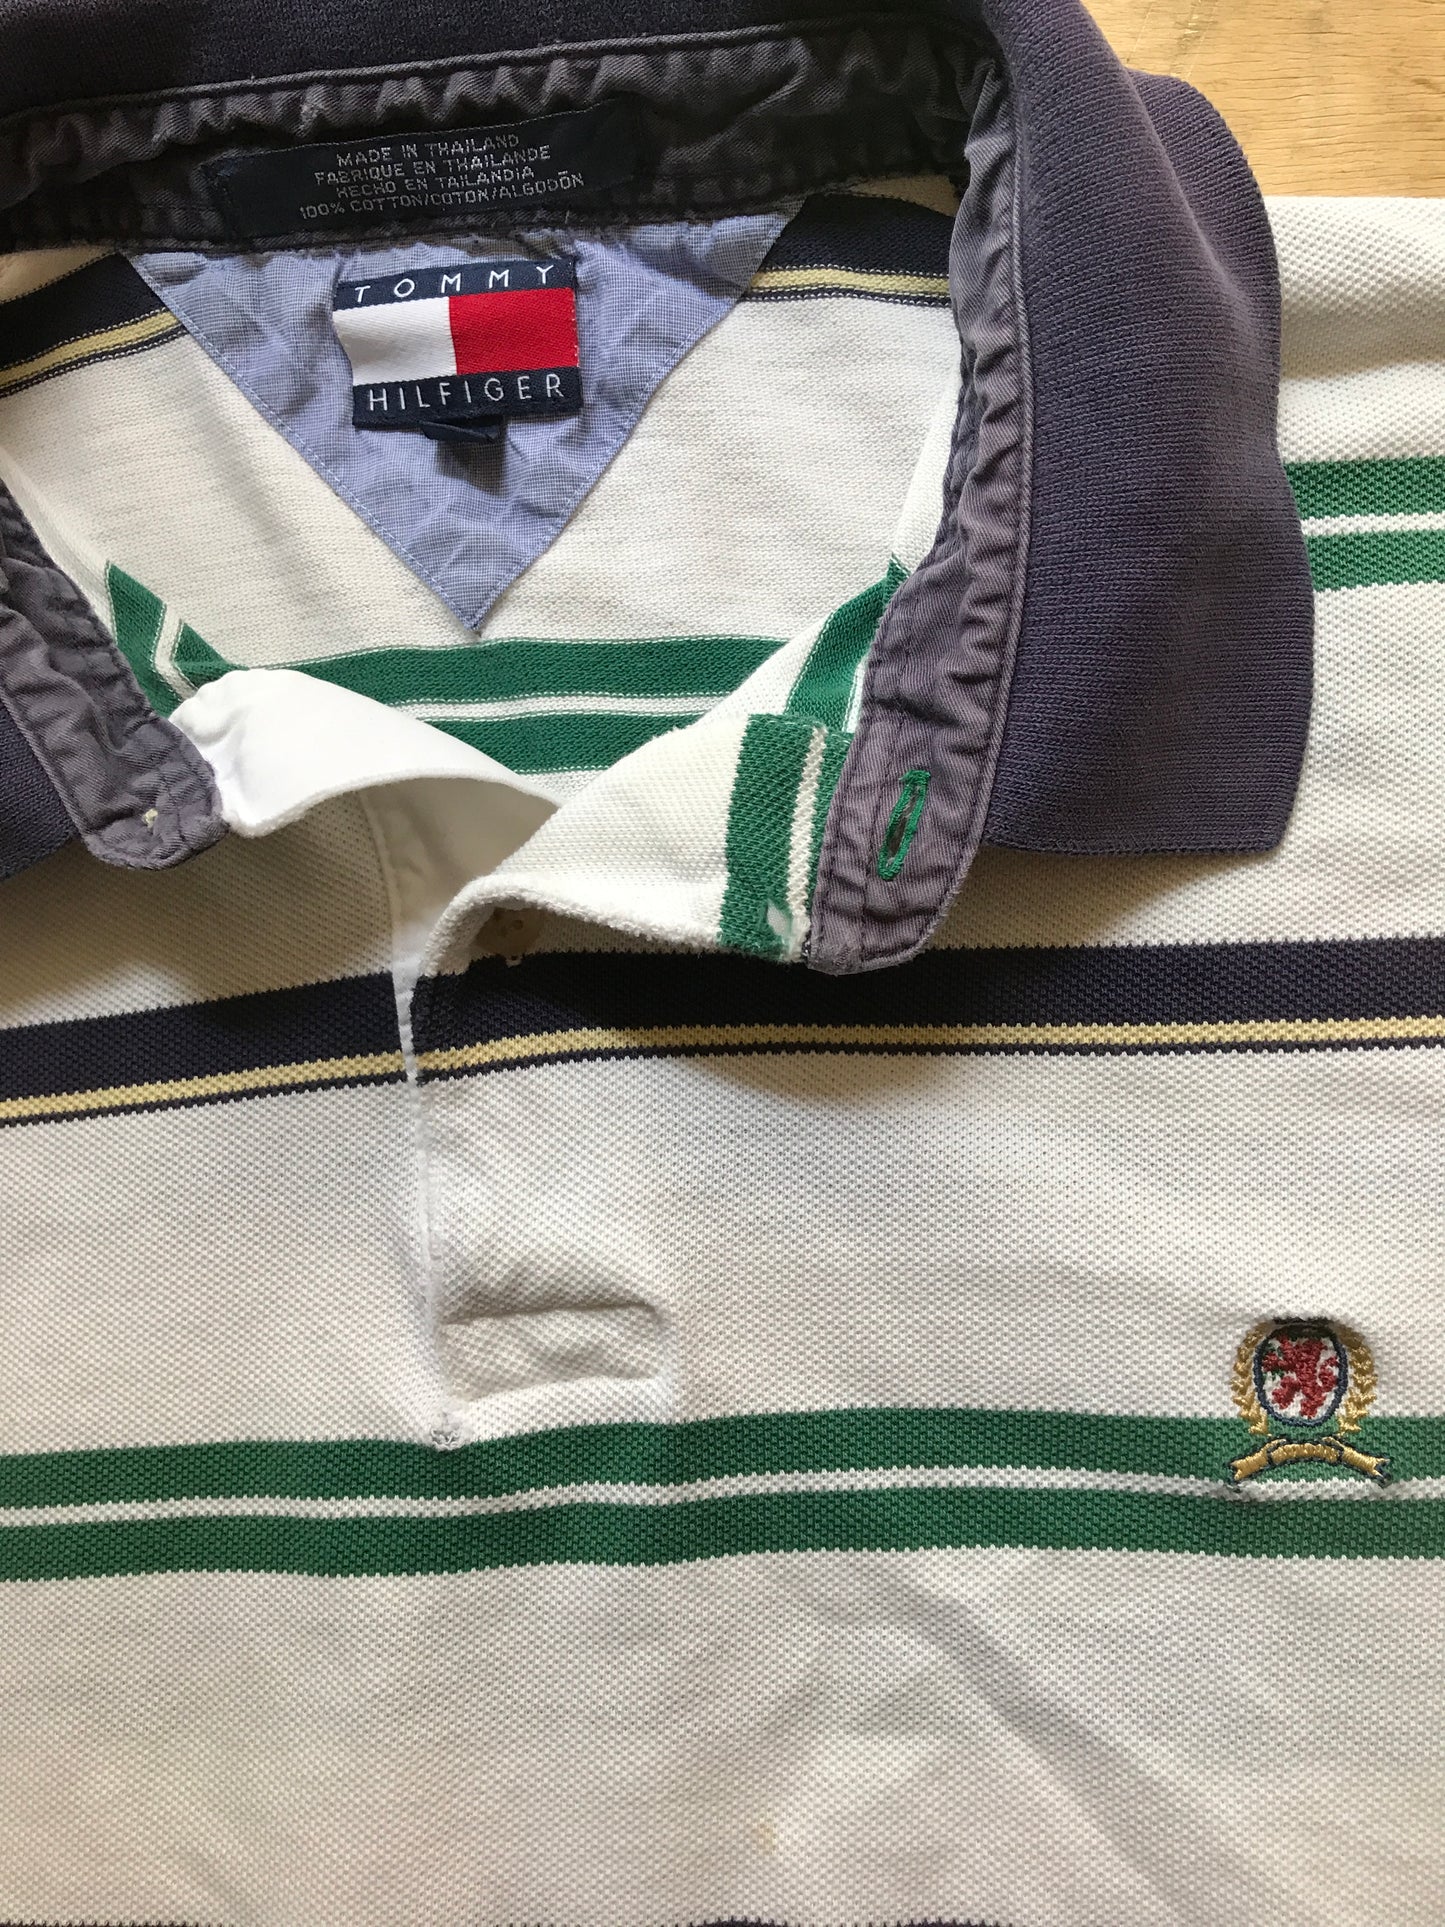 Vintage Tommy Polo Shirt